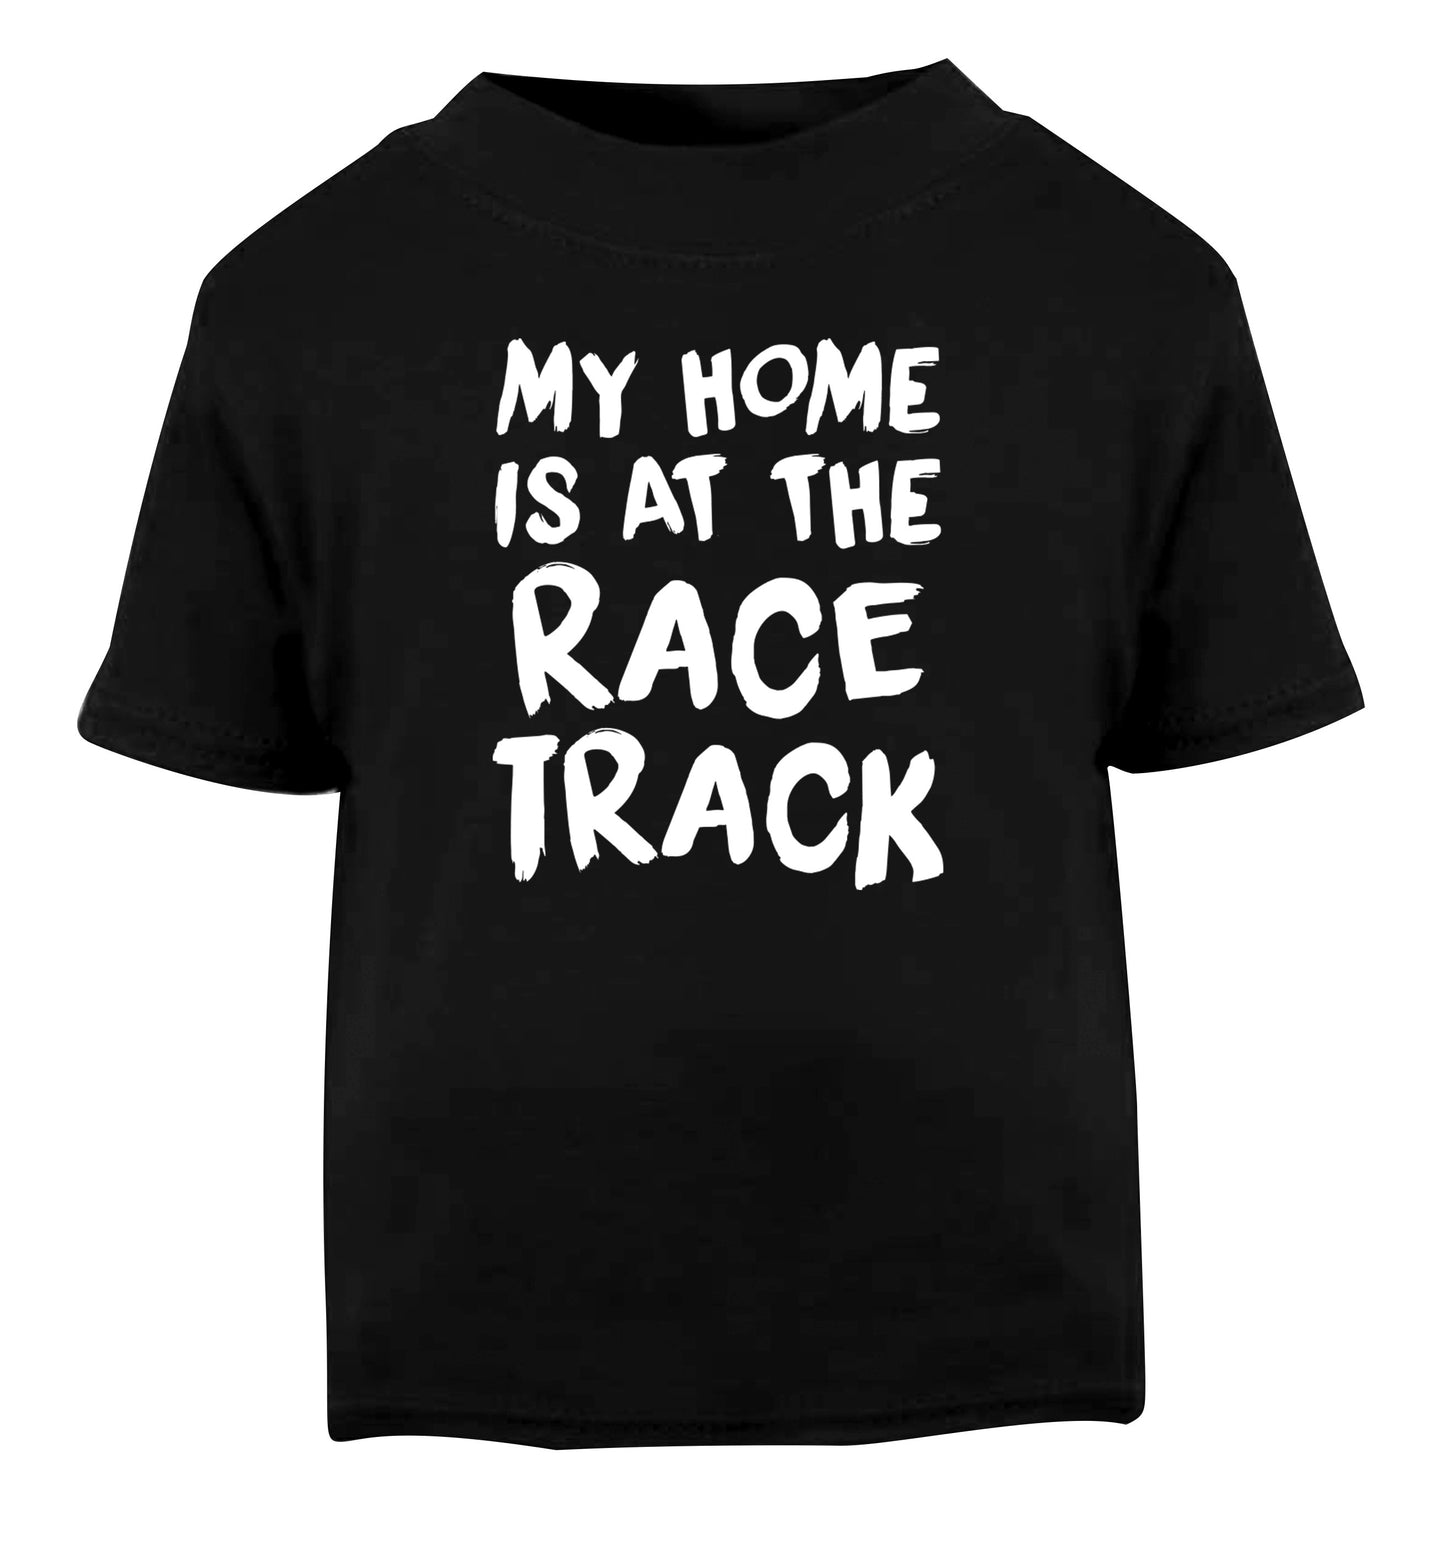 My home is at the race track Black Baby Toddler Tshirt 2 years